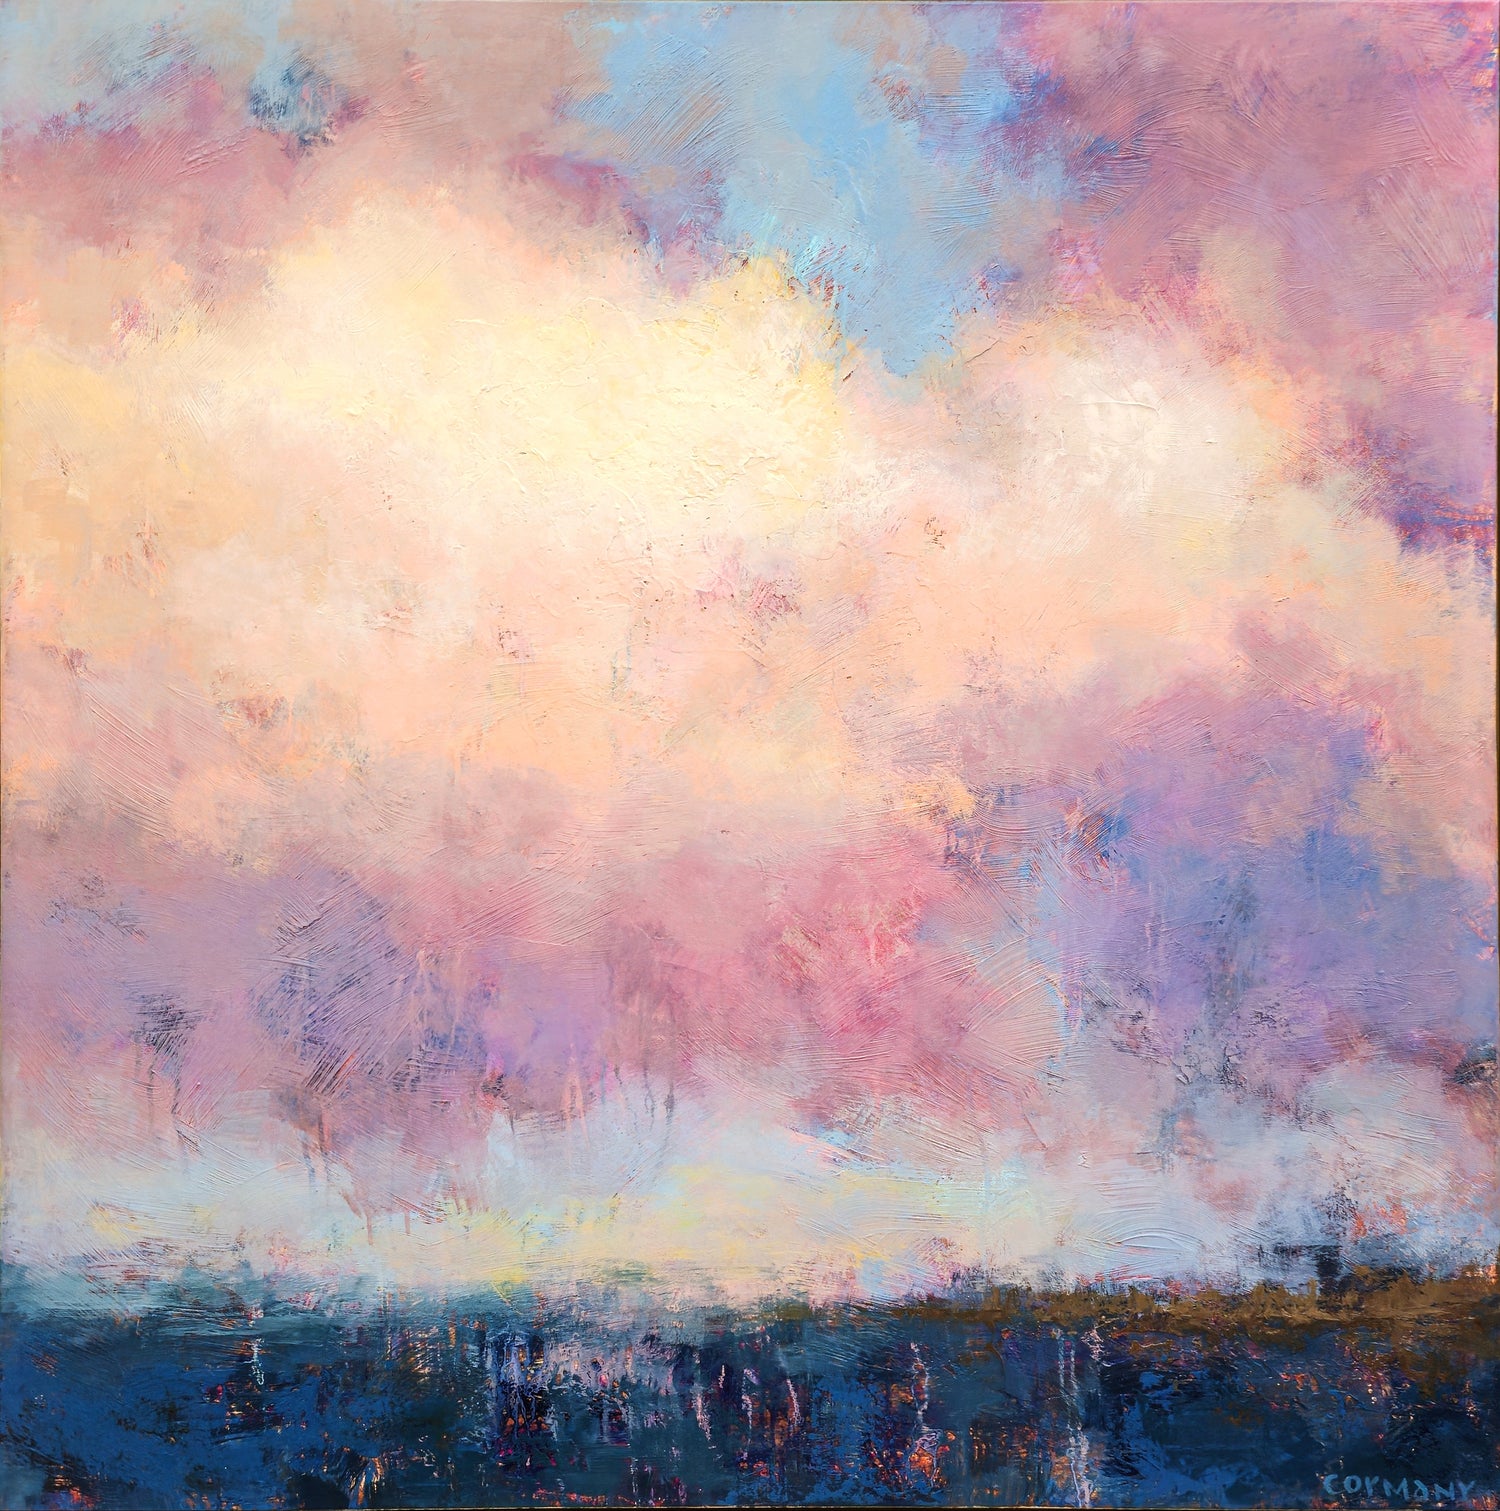 Claire Cormany - Four Seasons Gallery